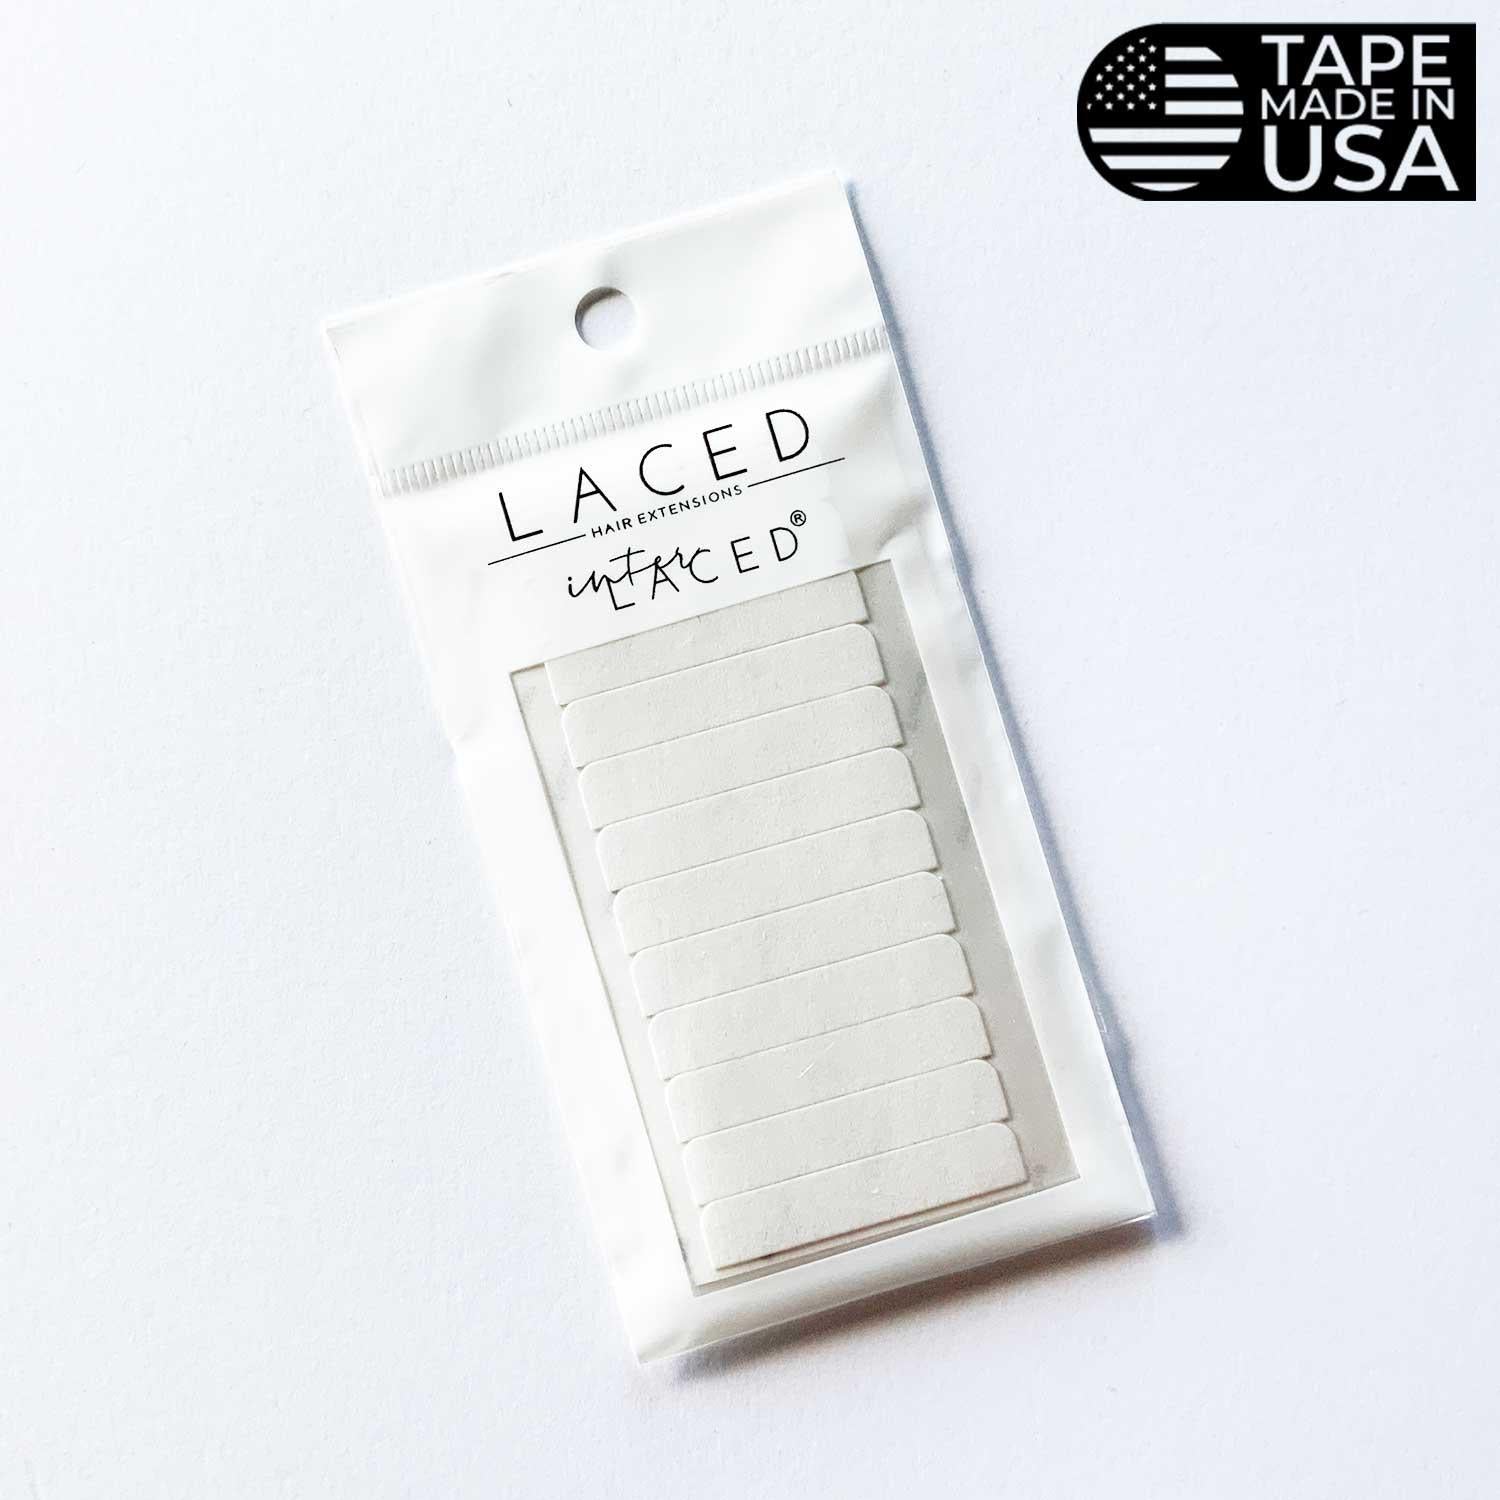 Laced Hair Double-Sided interLACED Tape Re-Tabs (for interLACED Extensions)